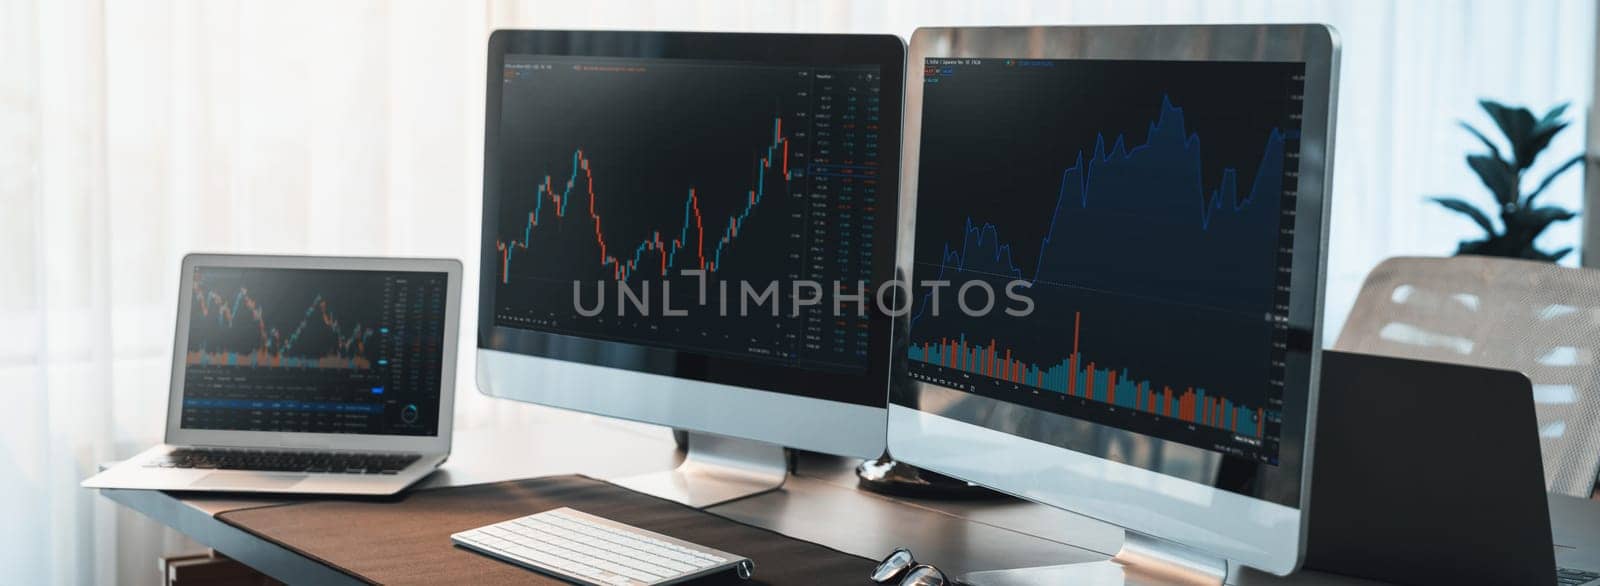 Stock market display on monitor screen for analytic stock trade investor. Computer showing online stock exchange trading, data index and statistic with dynamic financial data graph. Trailblazing